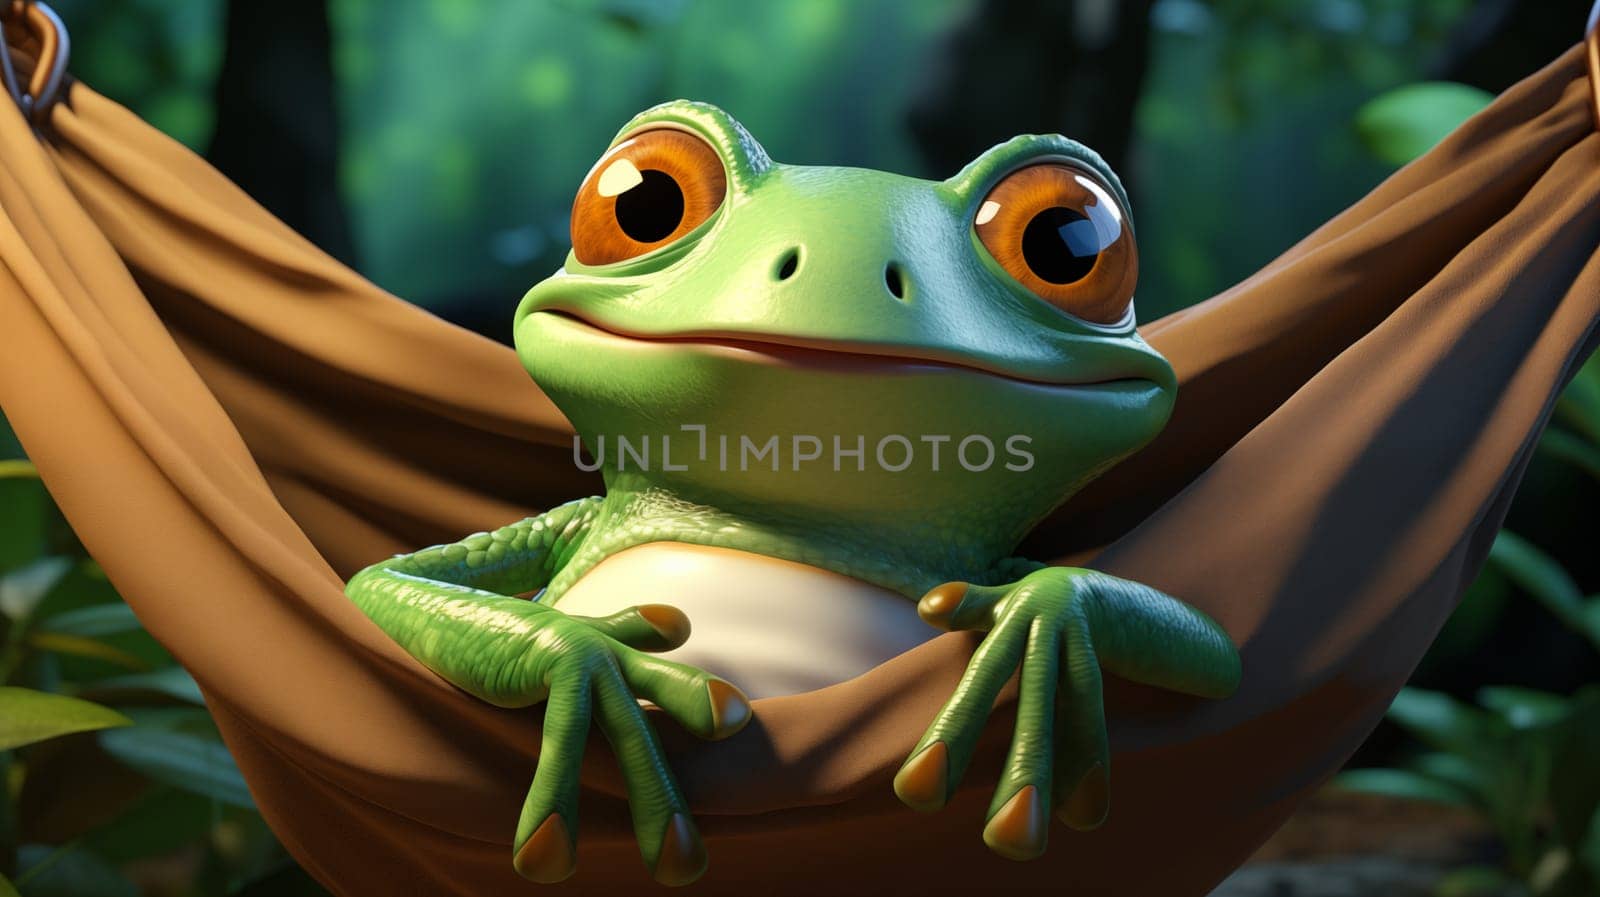 A vibrant, green frog with big eyes comfortably nestled in a brown hammock, surrounded by lush forest greenery.